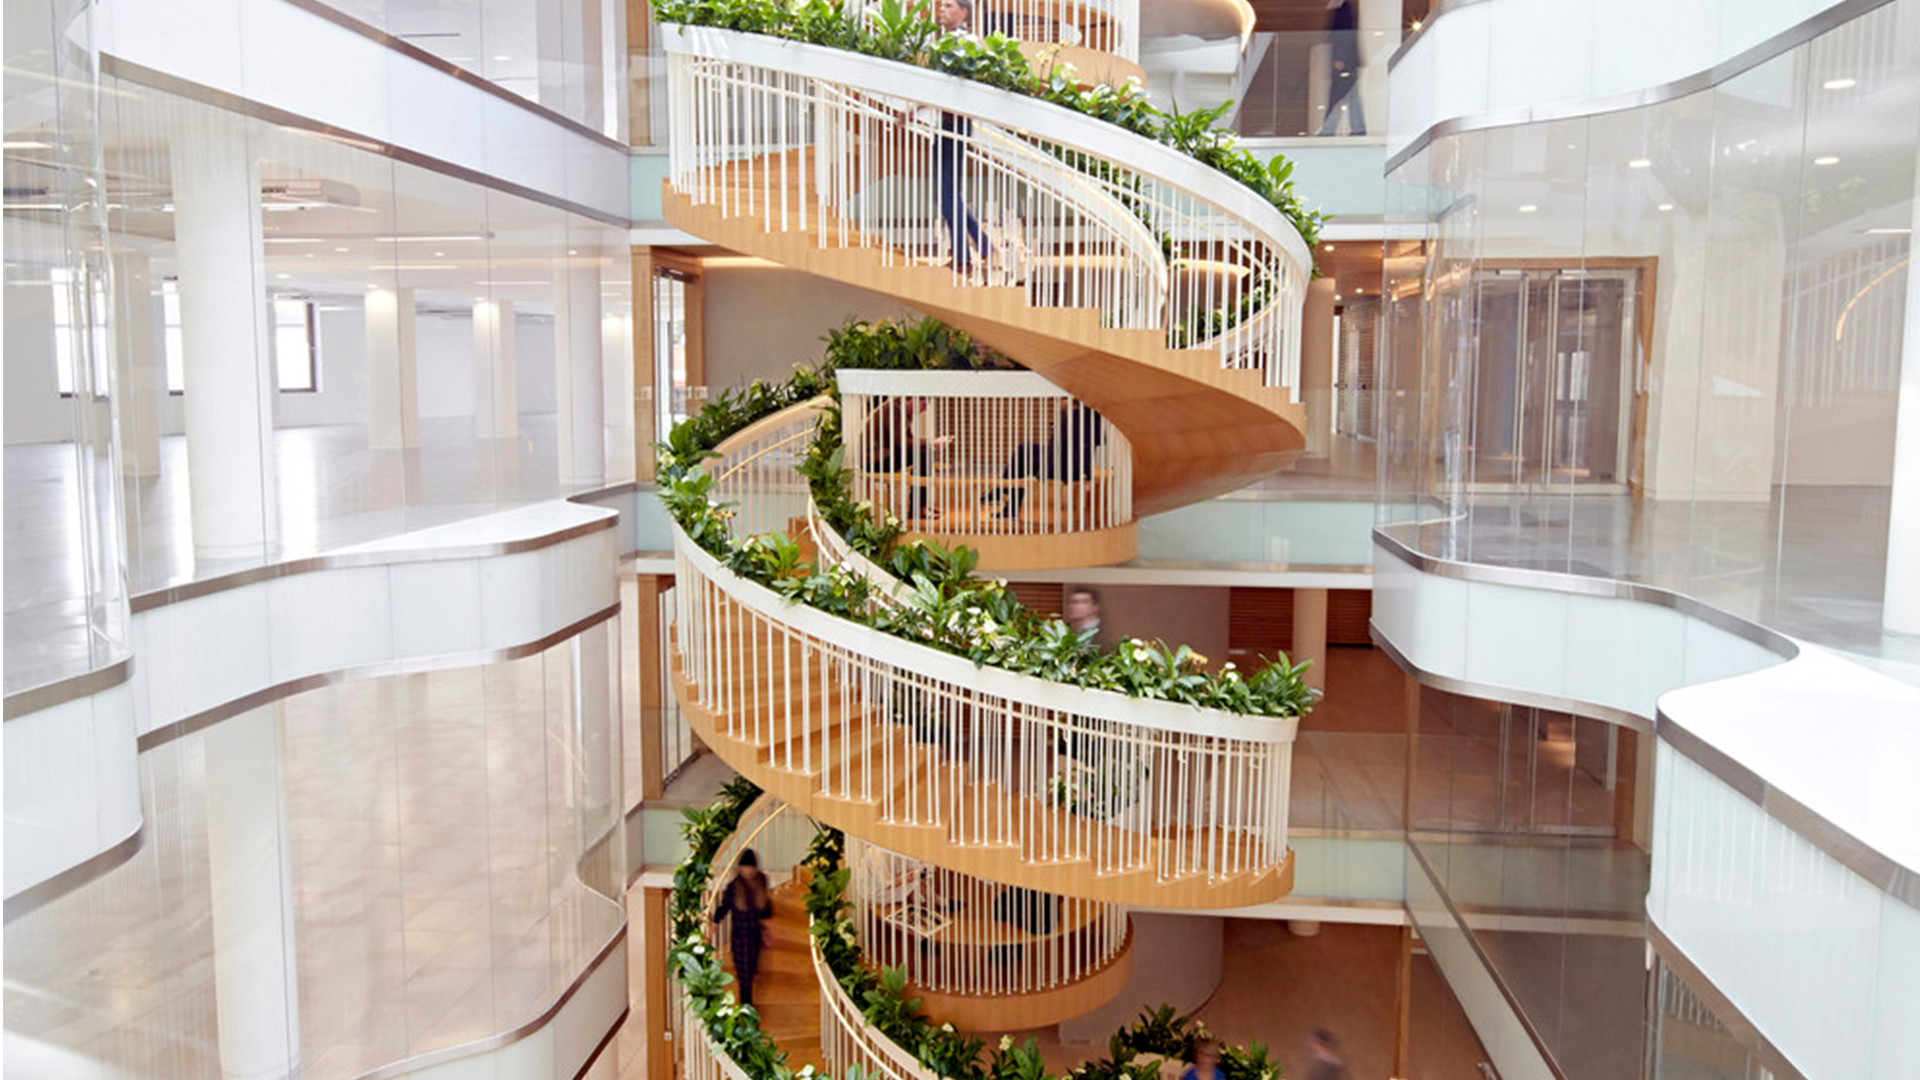 Spiral staircase in office with greenery on bannisters